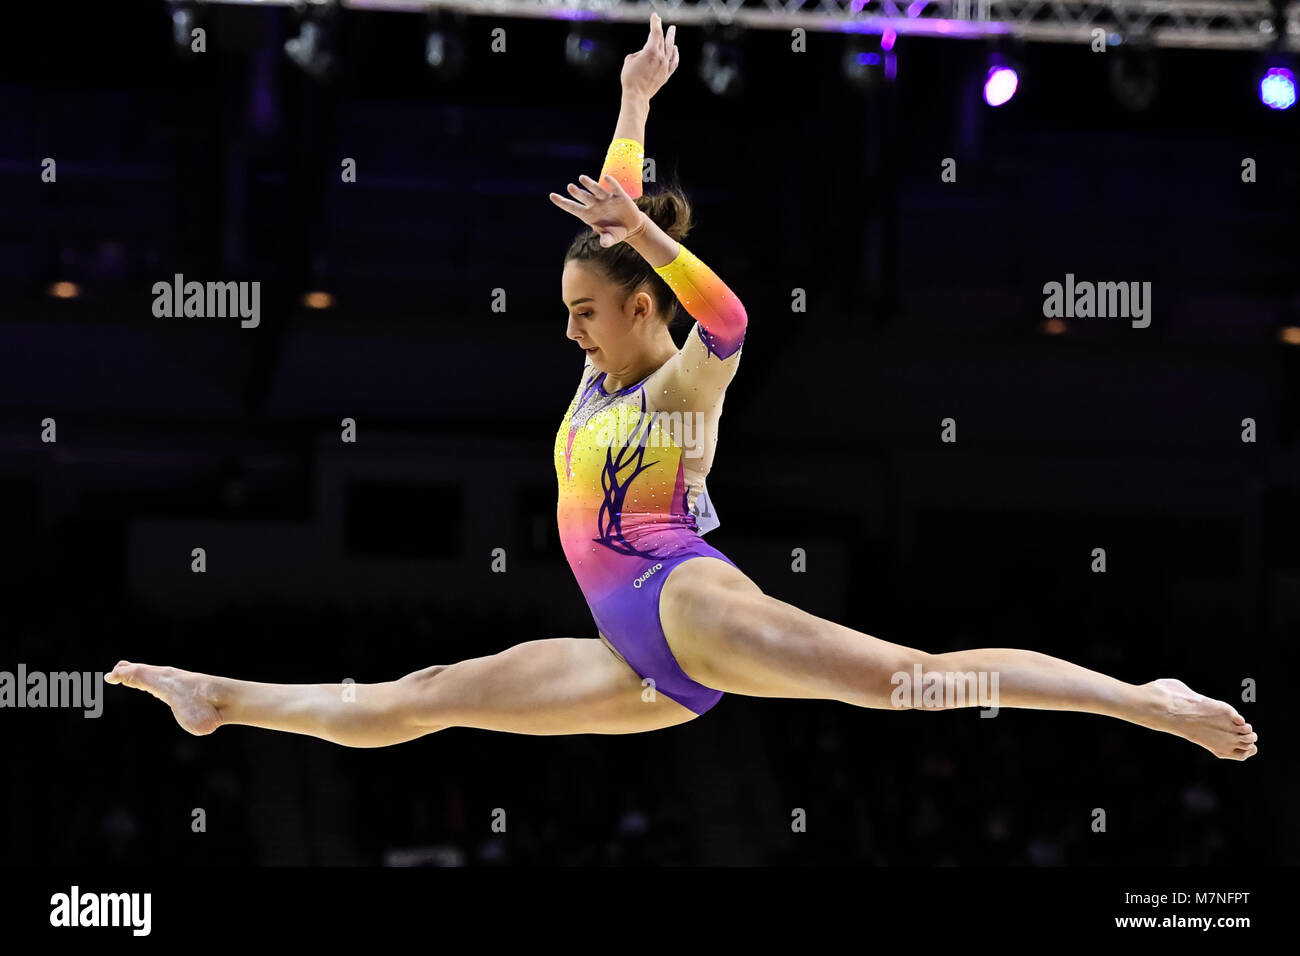 Echo Arena, Liverpool, UK. 11th Mar, 2018. Eilee Cheetham competes on the Balance Beam during the WAG Senior Apparatus Final/MAG Masters of the 2018 Gymnastics British Championships at Echo Arena on Sunday, 11 March 2018. LIVERPOOL ENGLAND. Credit: Taka G Wu Credit: Taka Wu/Alamy Live News Stock Photo